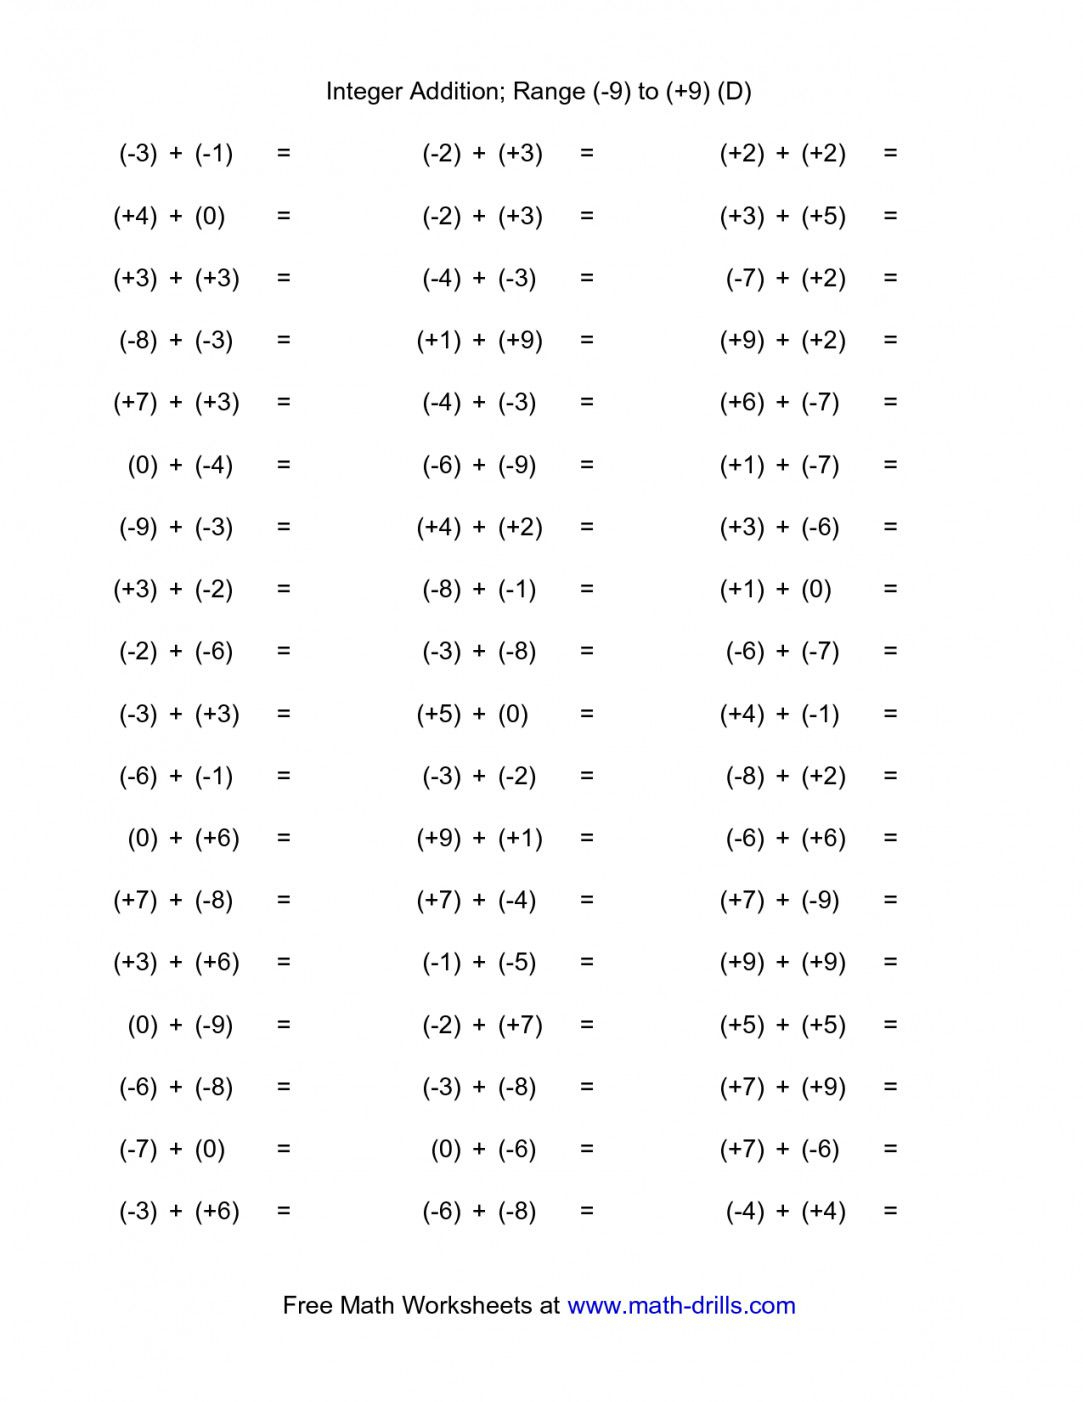 Integers Rules Number Line Notes And Practice Problems Worksheets Free Printable Integer